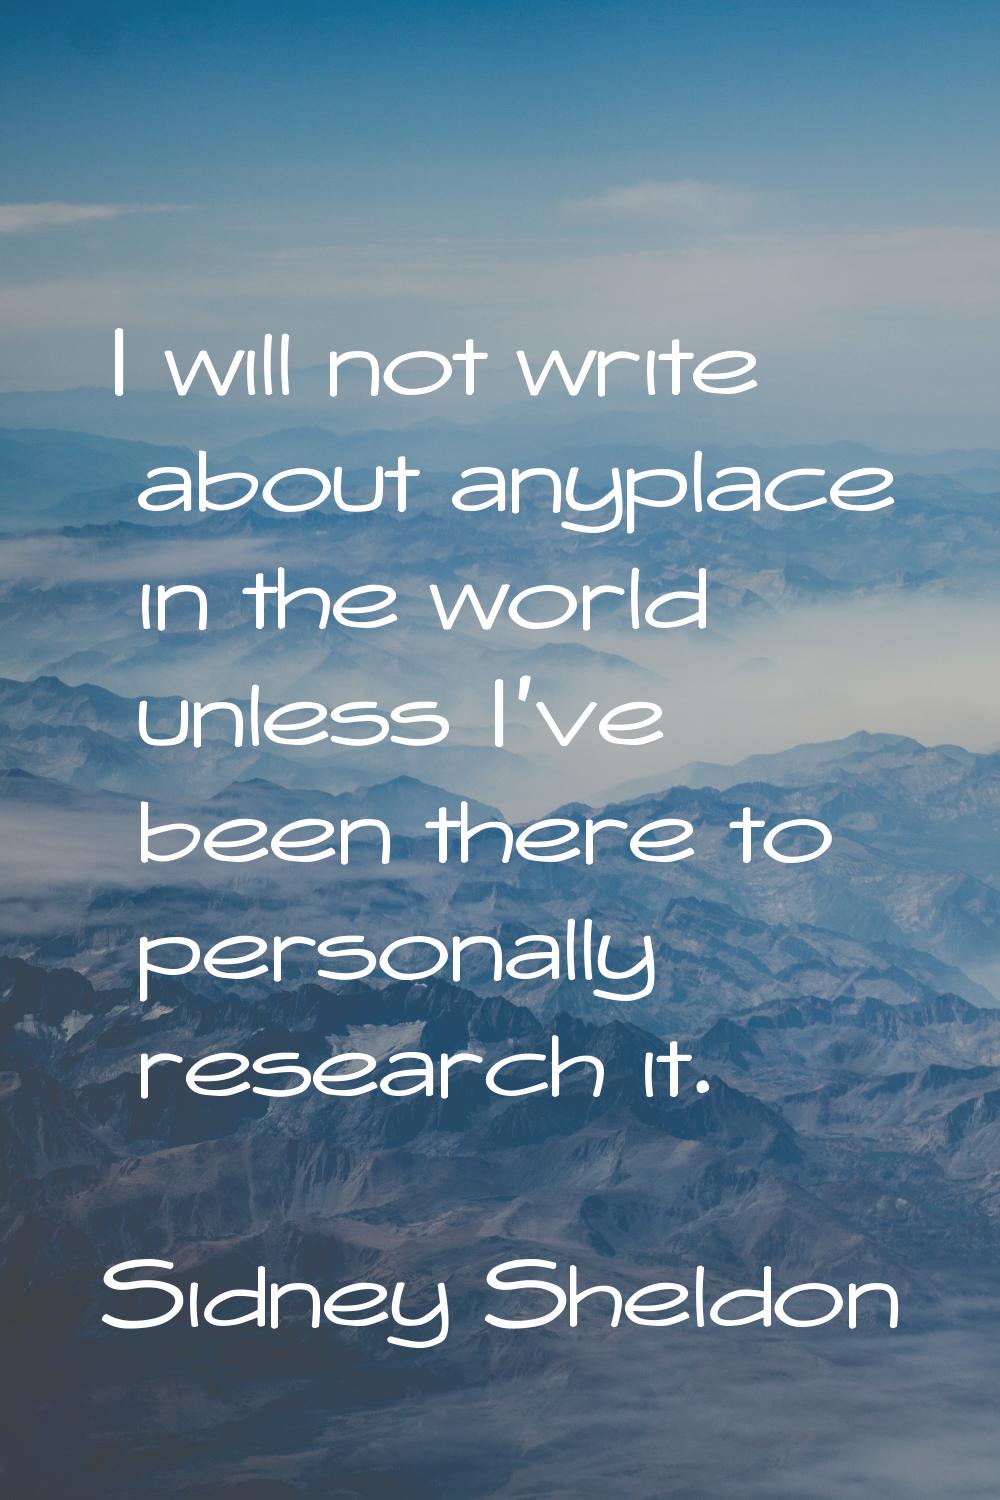 I will not write about anyplace in the world unless I've been there to personally research it.